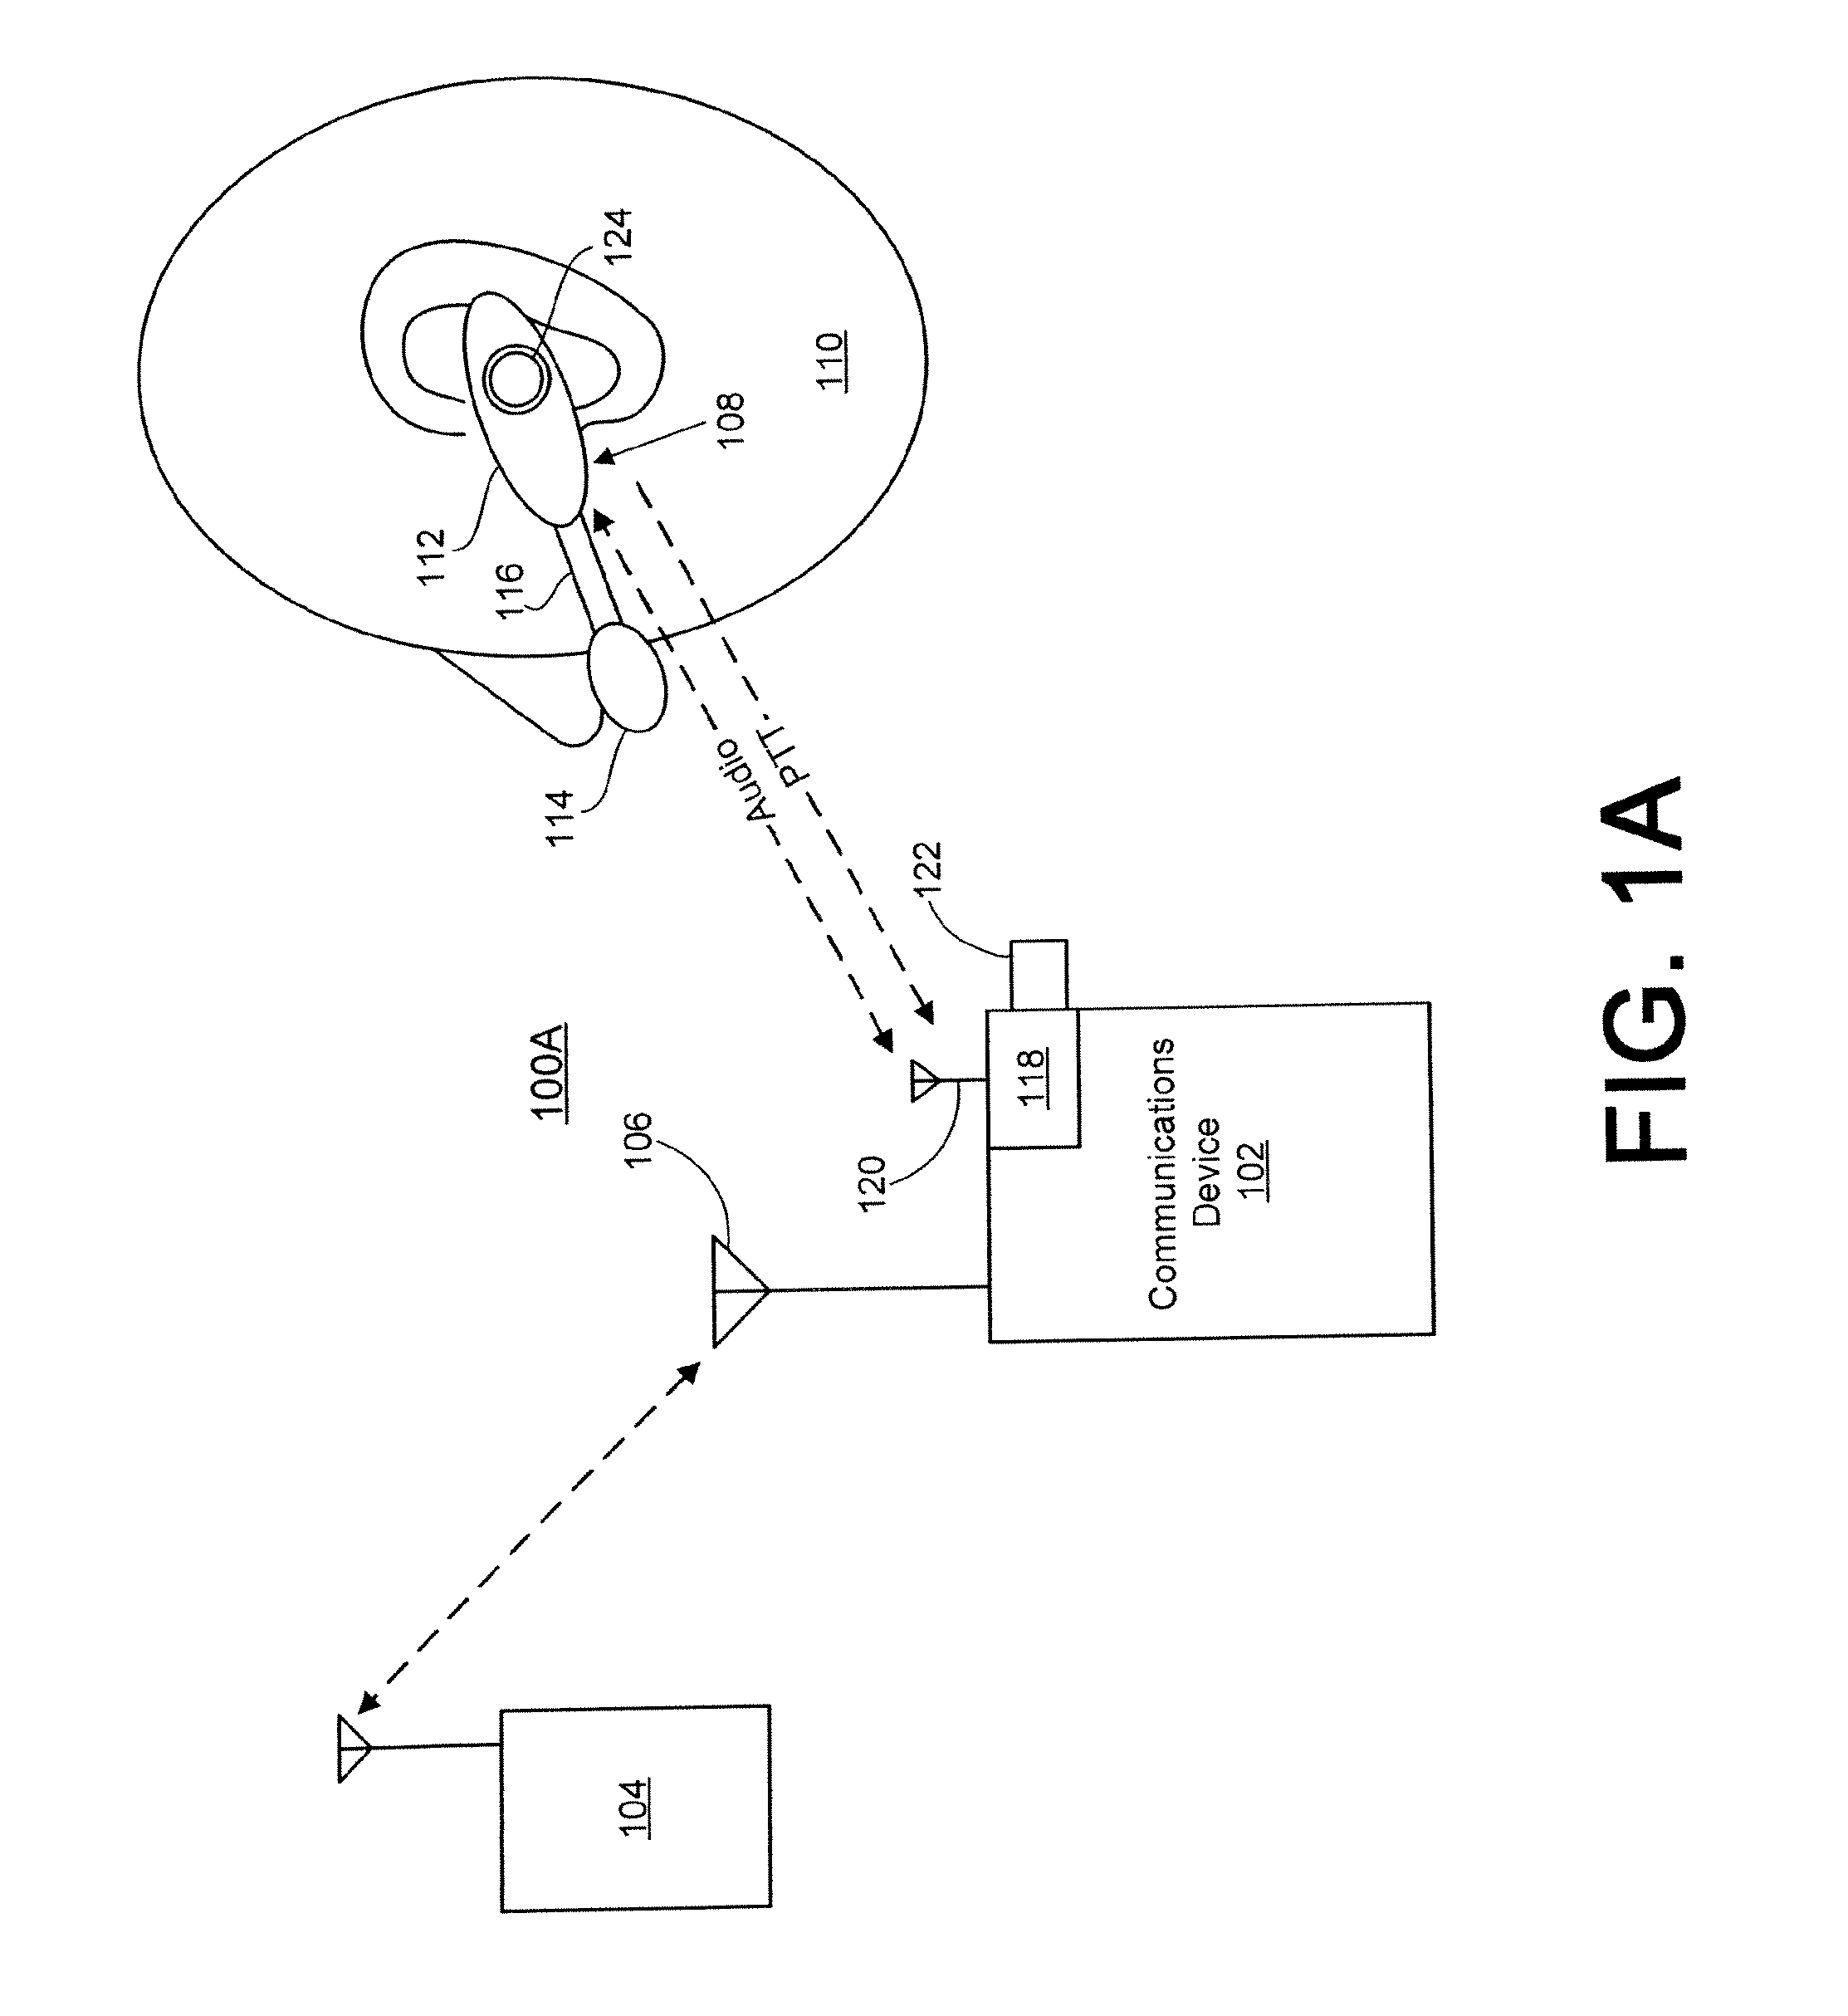 Wireless headset and microphone assembly for communications device